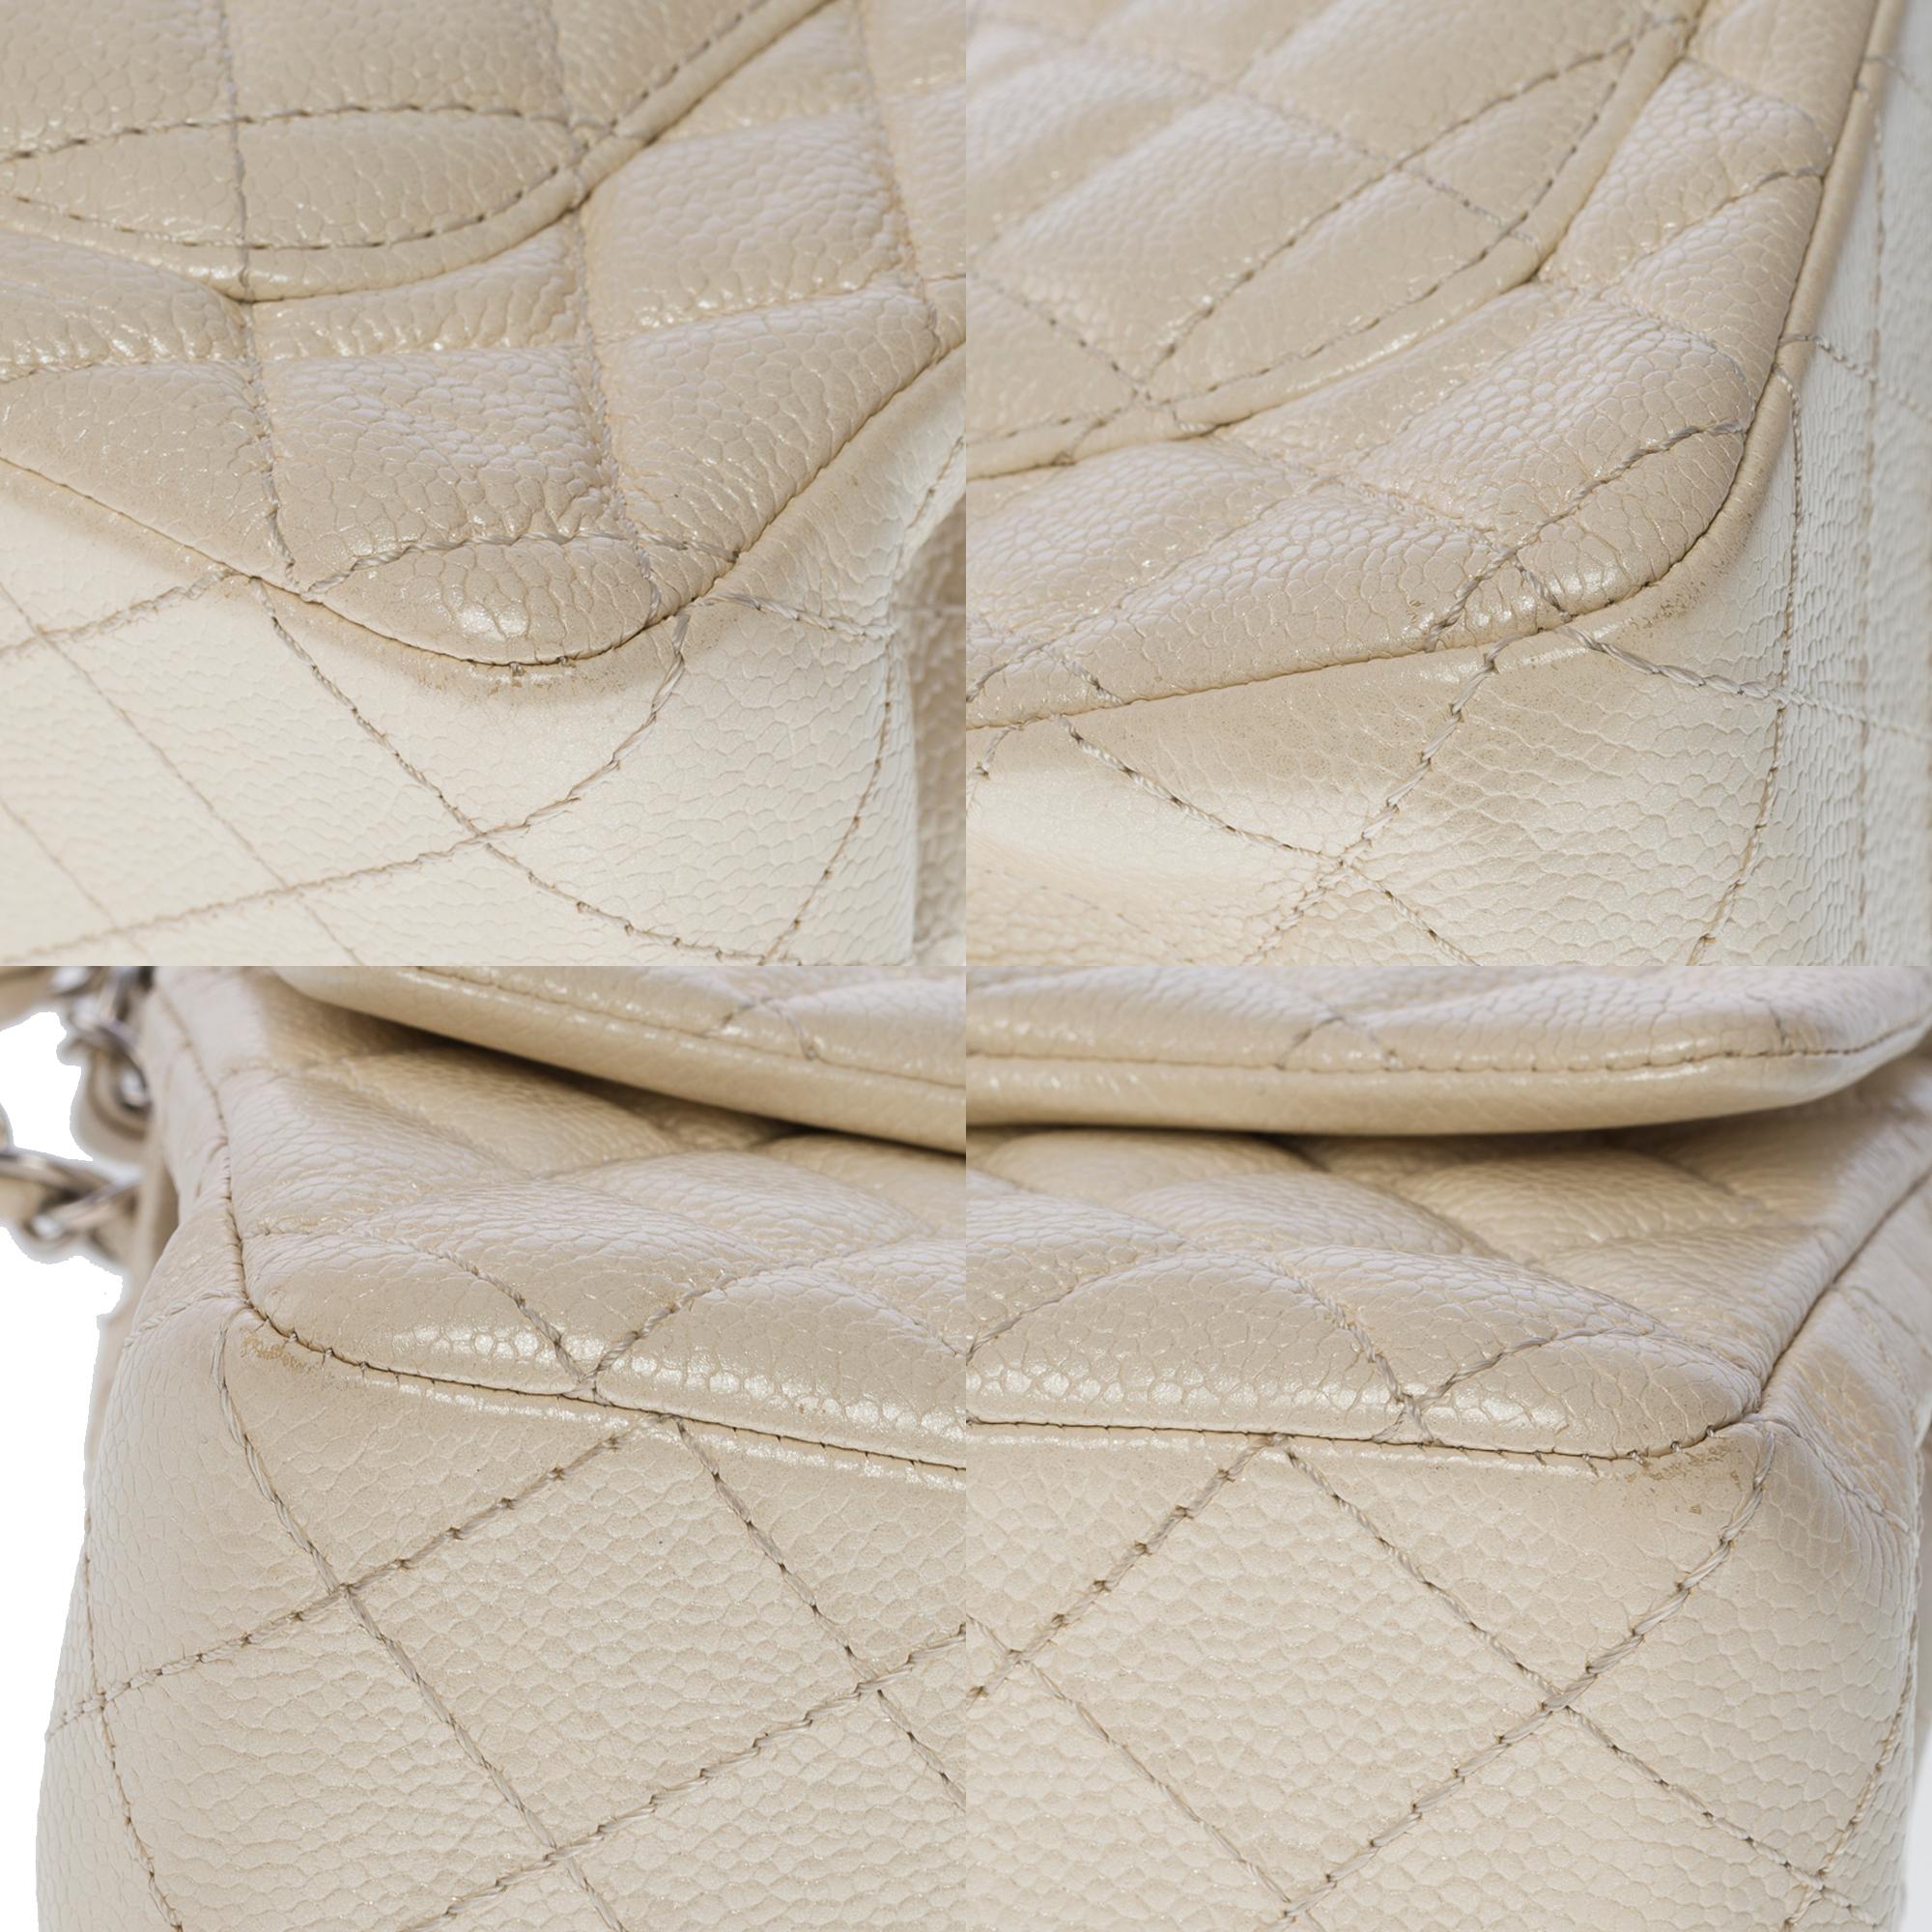 Splendid Chanel Timeless Mini Flap bag in off white pearl quilted leather, SHW For Sale 7